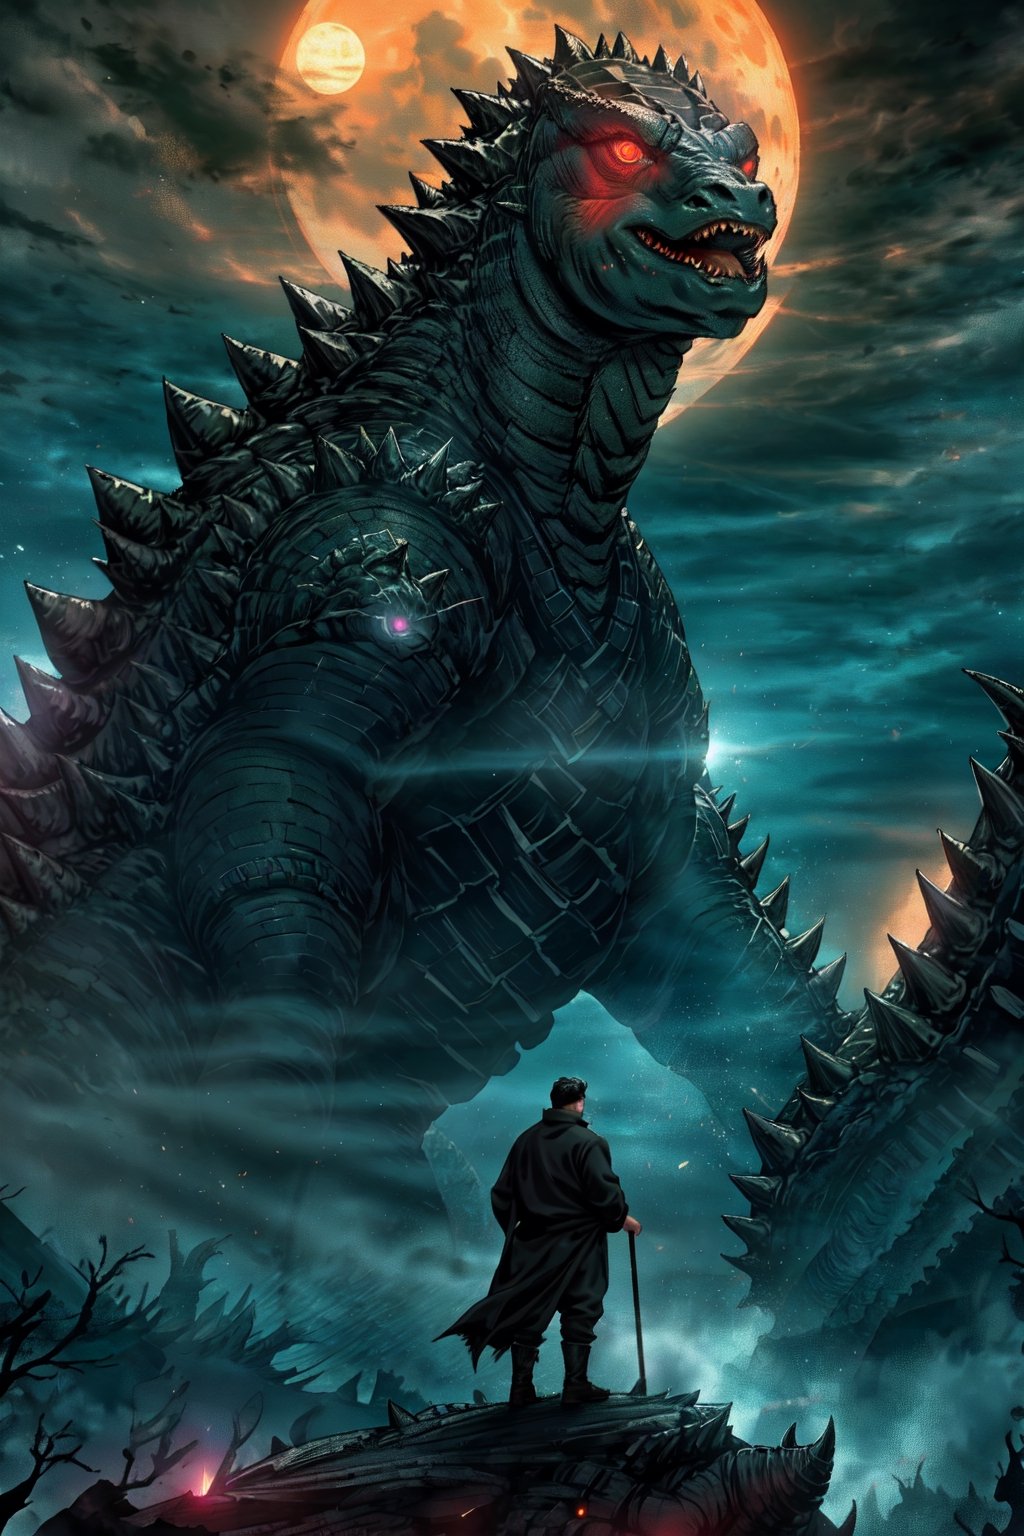 imagenstyle_darkfantasy, solo_focus, .1man, royal_guardian, in forest, night, moon top in sky, rude face, wild looking, man factions, detailed_face, detailed hair, looking_at_camera, (((godzilla behind,))upper head, focus on face, glowing eyes, dark ambient, scary place, weir ascpect, sketch,